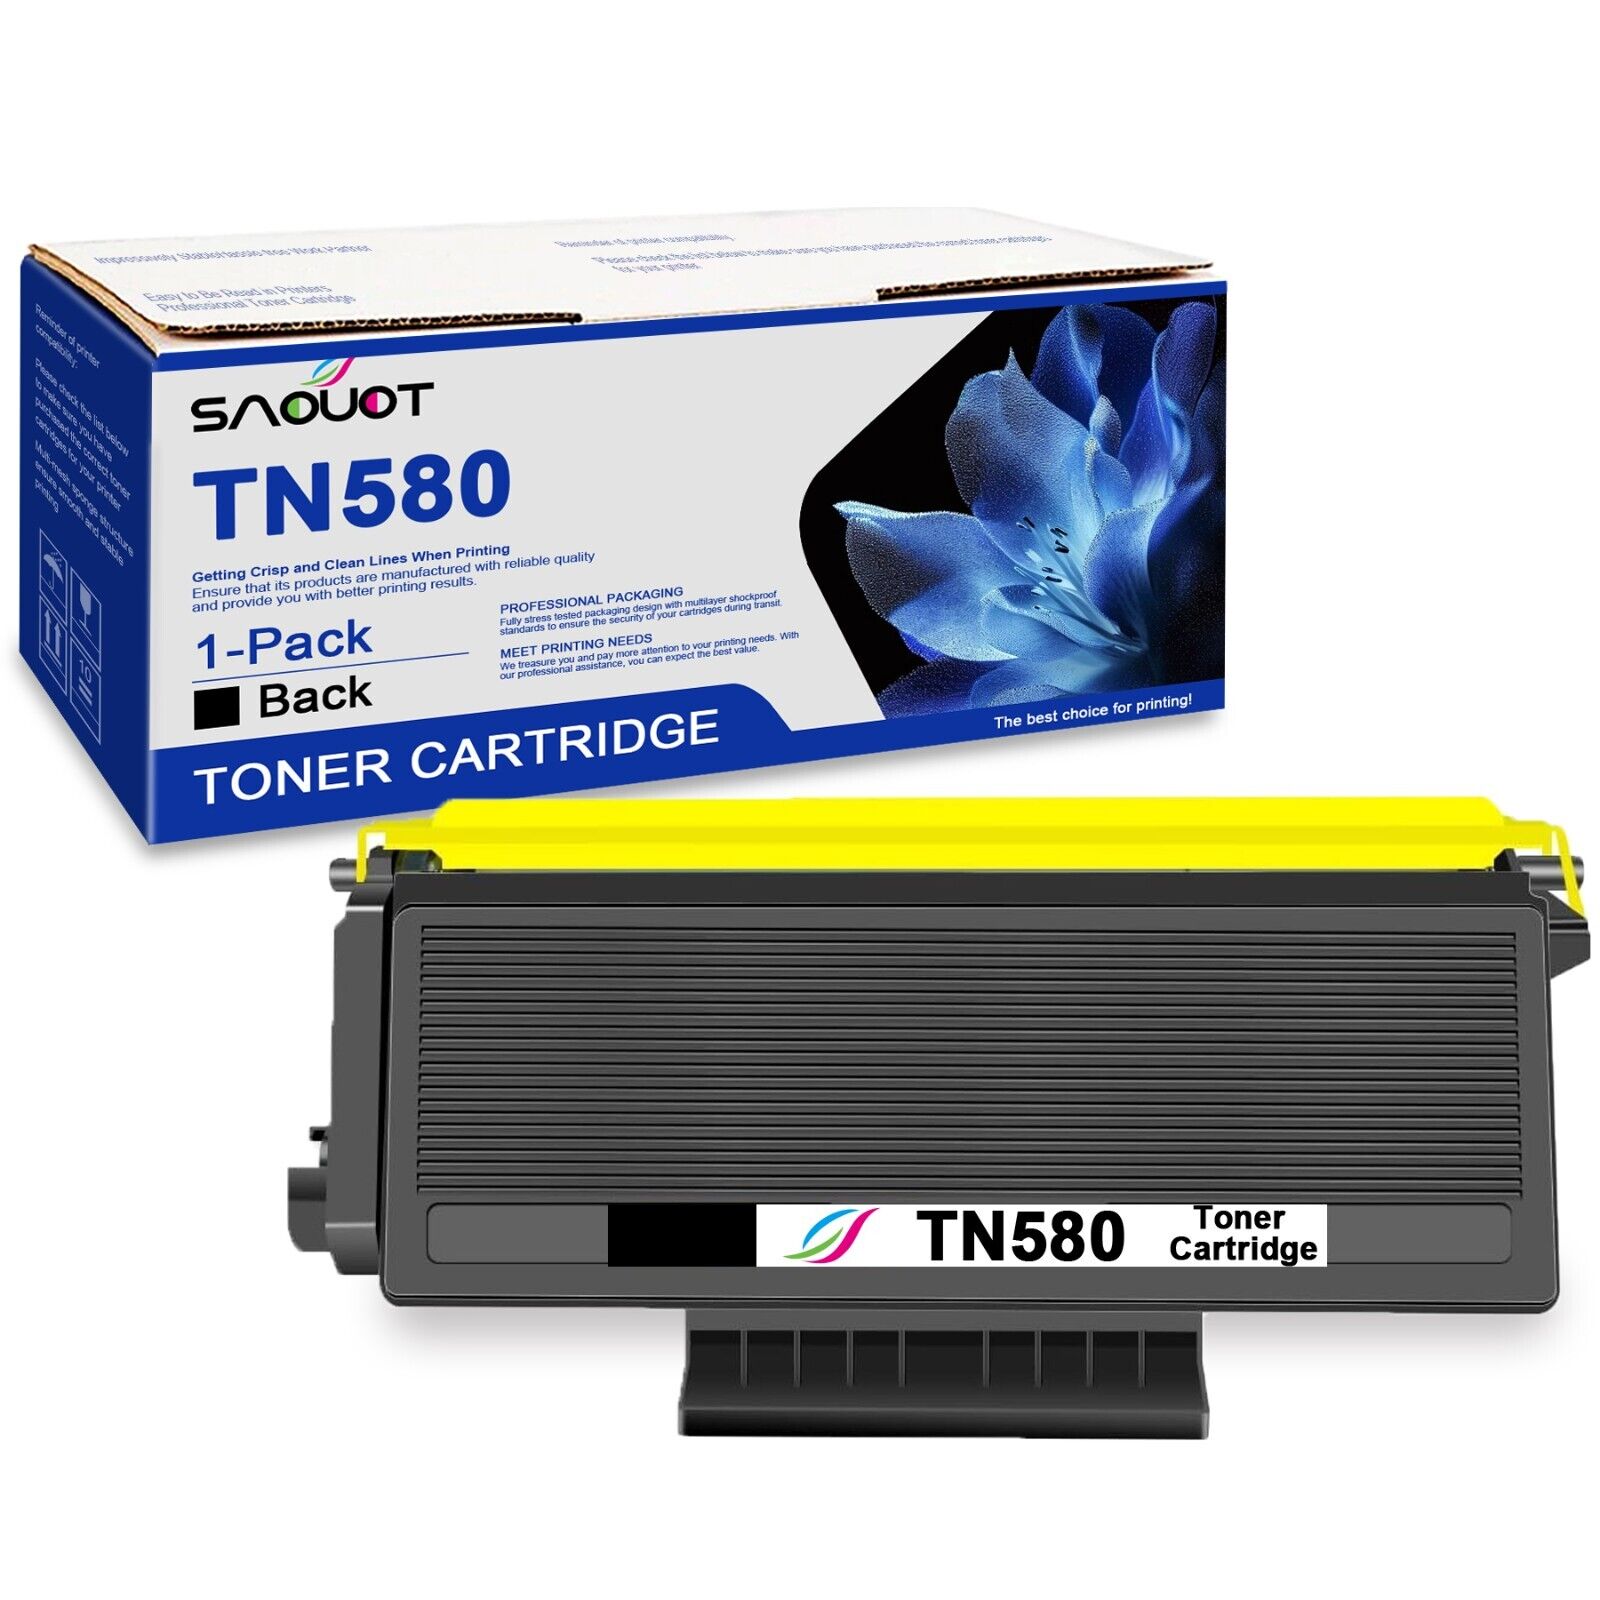 TN580 Toner Replacement for Brother HL-5240 5240L MFC-8460N DCP-8060 8065DN